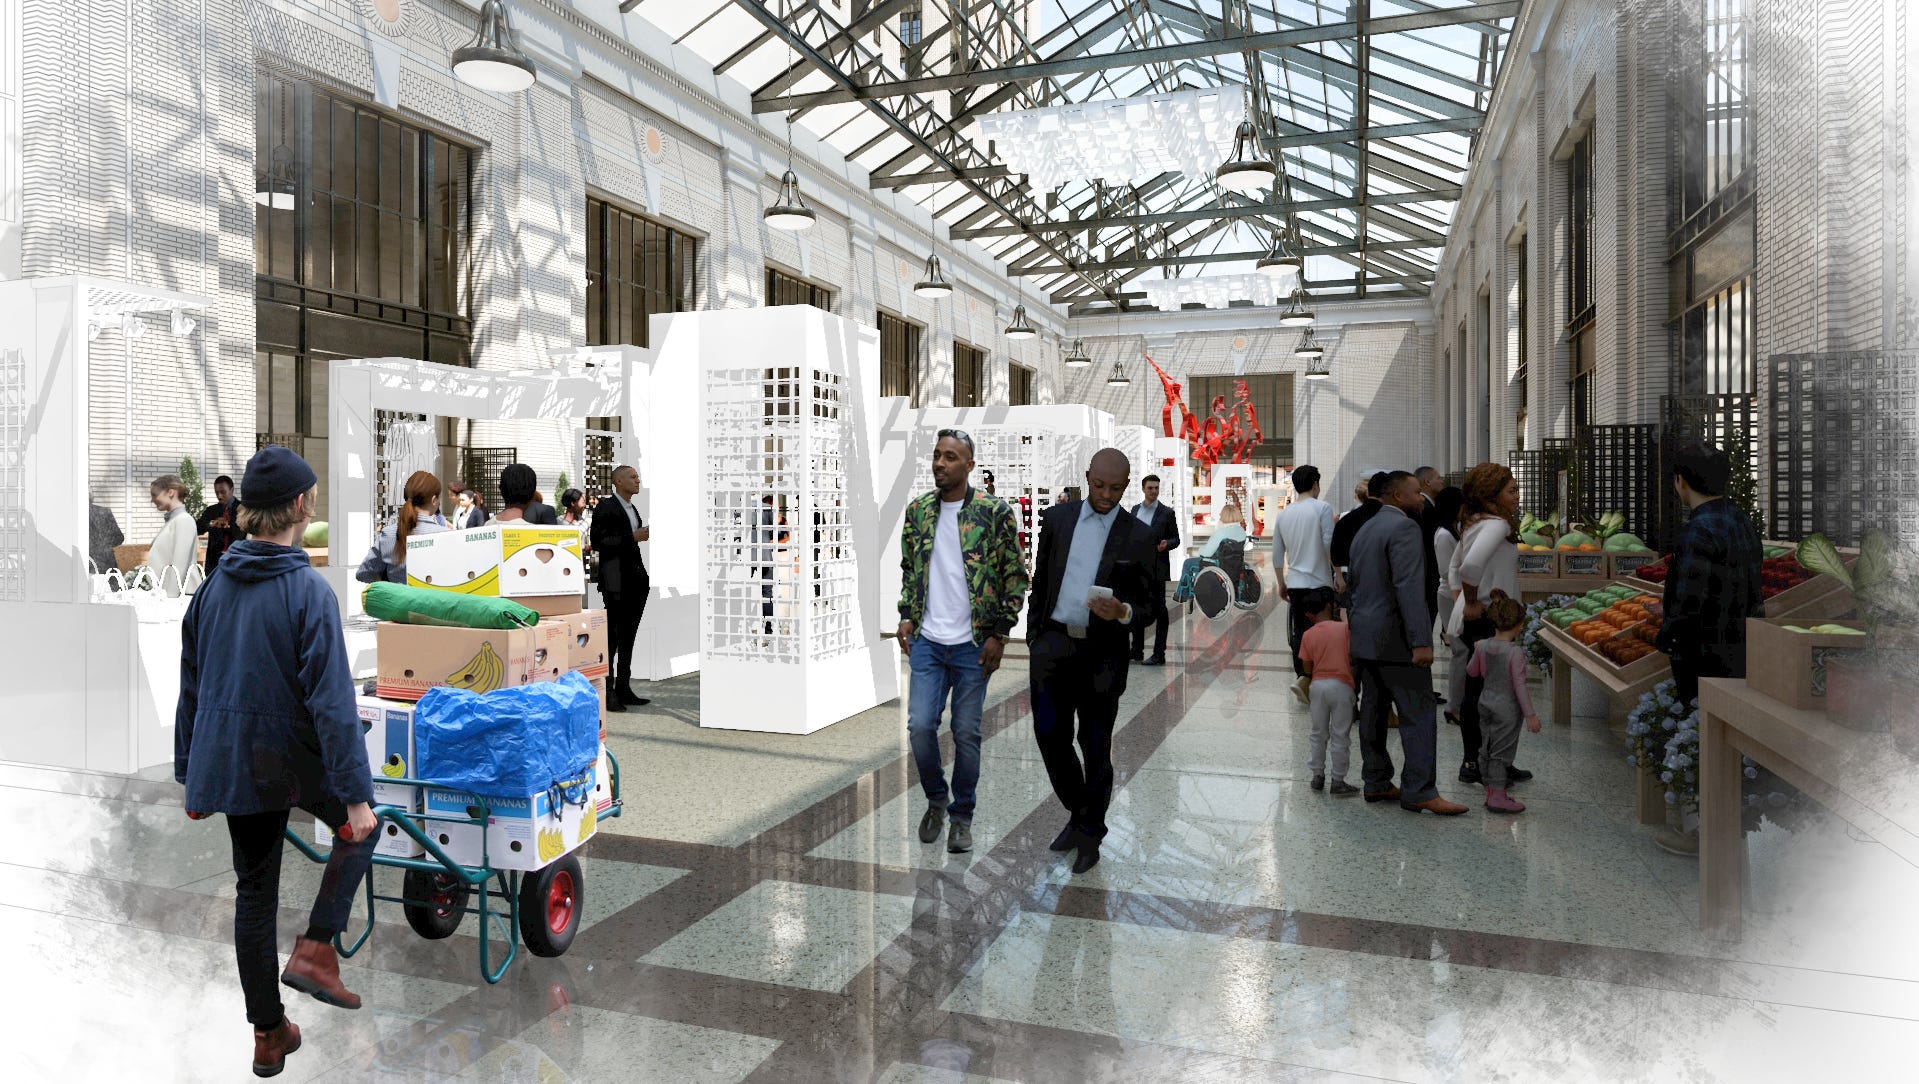 An artist's rendering shows a market for fresh produce in the atrium space.